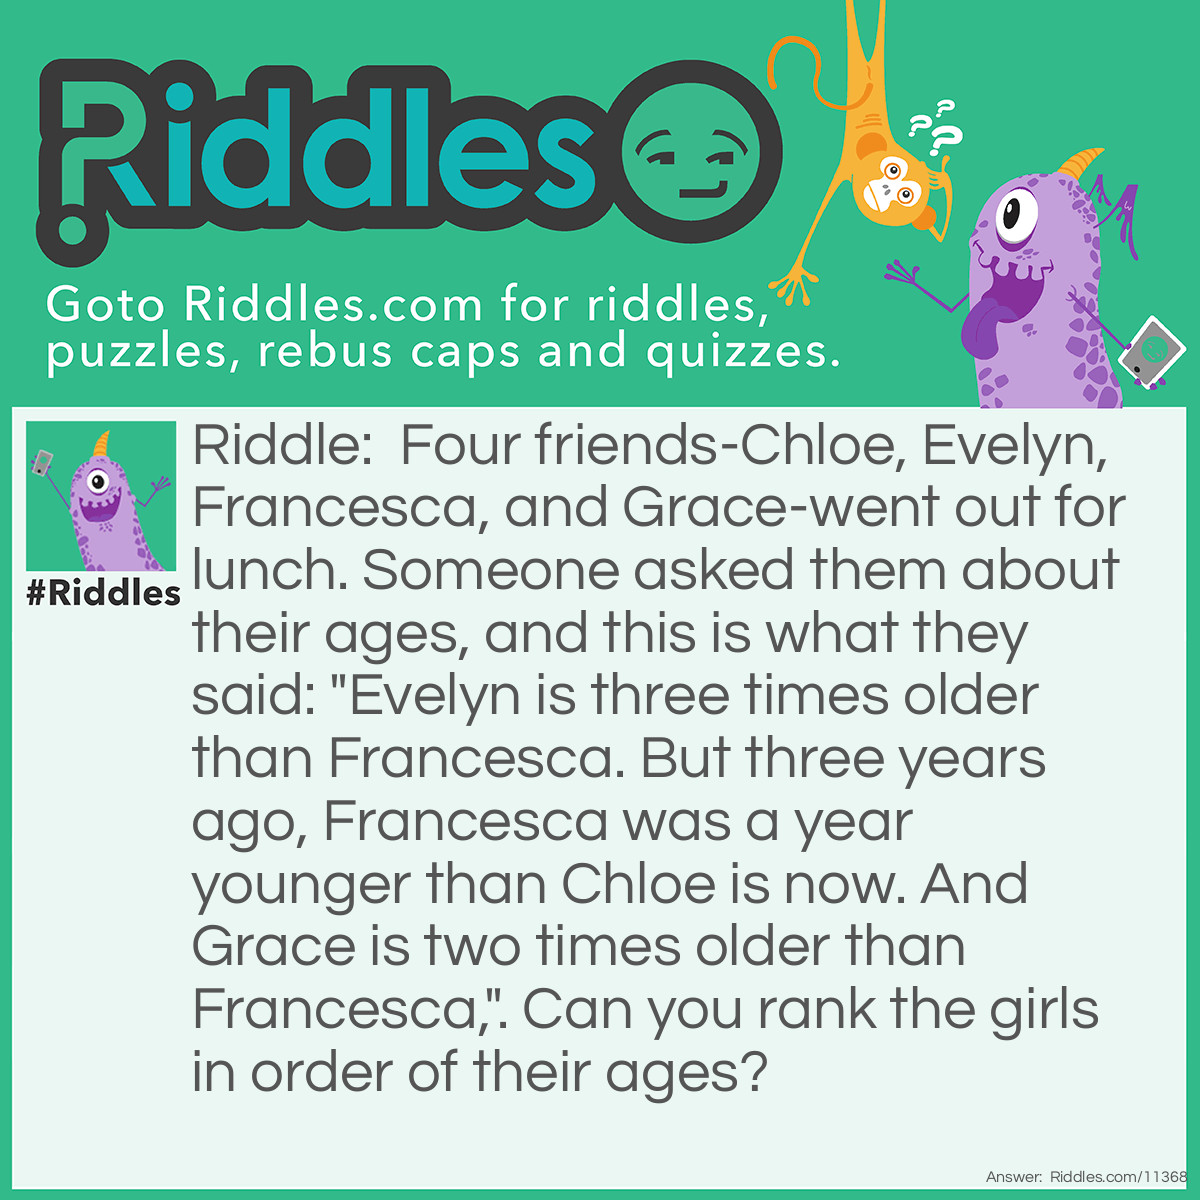 Riddle: Four friends-Chloe, Evelyn, Francesca, and Grace-went out for lunch. Someone asked them about their ages, and this is what they said: "Evelyn is three times older than Francesca. But three years ago, Francesca was a year younger than Chloe is now. And Grace is two times older than Francesca,". Can you rank the girls in order of their ages? Answer: From oldest to youngest, the order is as follows: Evelyn, Grace, Francesca, and Chloe. Evelyn is three times older than Francesca, and Grace is two times older than Francesca. Evelyn is older than Grace because multiplying a number by three will result in a greater number than multiplying the number by two. Both of them are older than Francesca, but if it was three years ago that Francesca was a year younger than Chloe is now, then Francesca is two years older than Chloe. Therefore, Evelyn is the oldest, followed by Grace, then Francesca, and then Chloe.